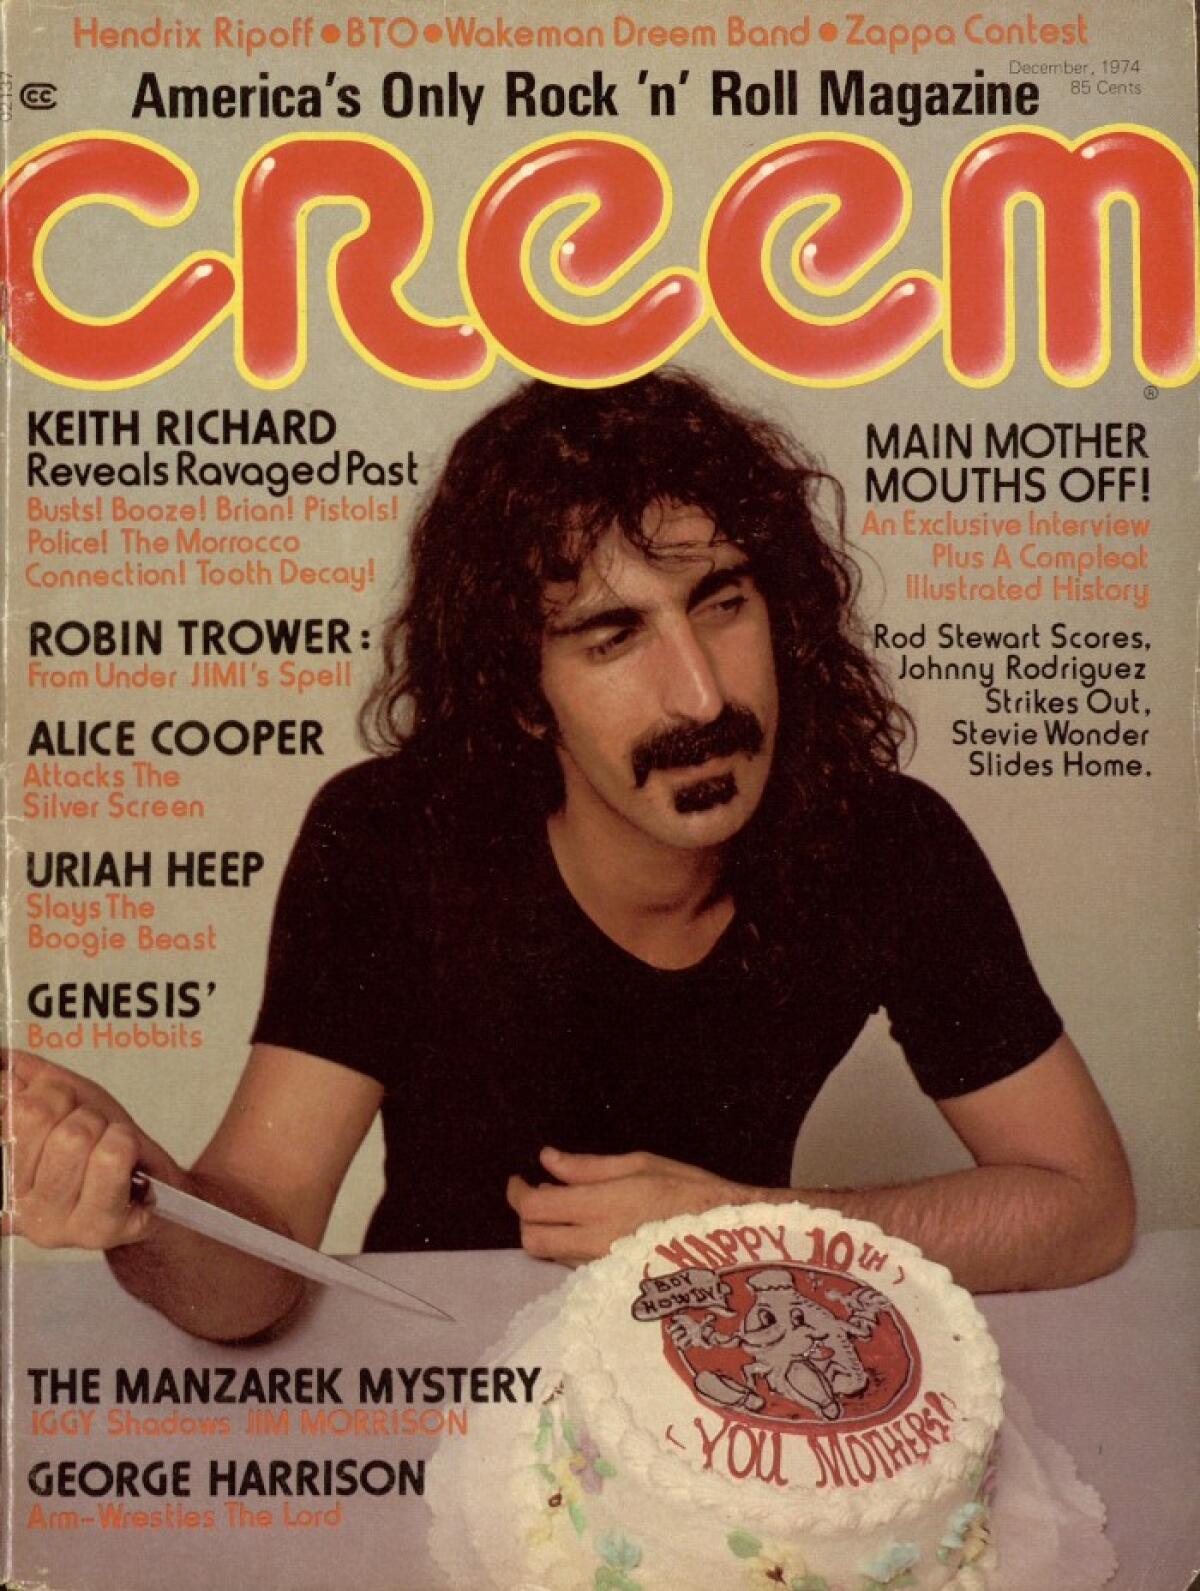 Creem Magazine cover featuring Frank Zappa holding a large knife aimed at a birthday cake